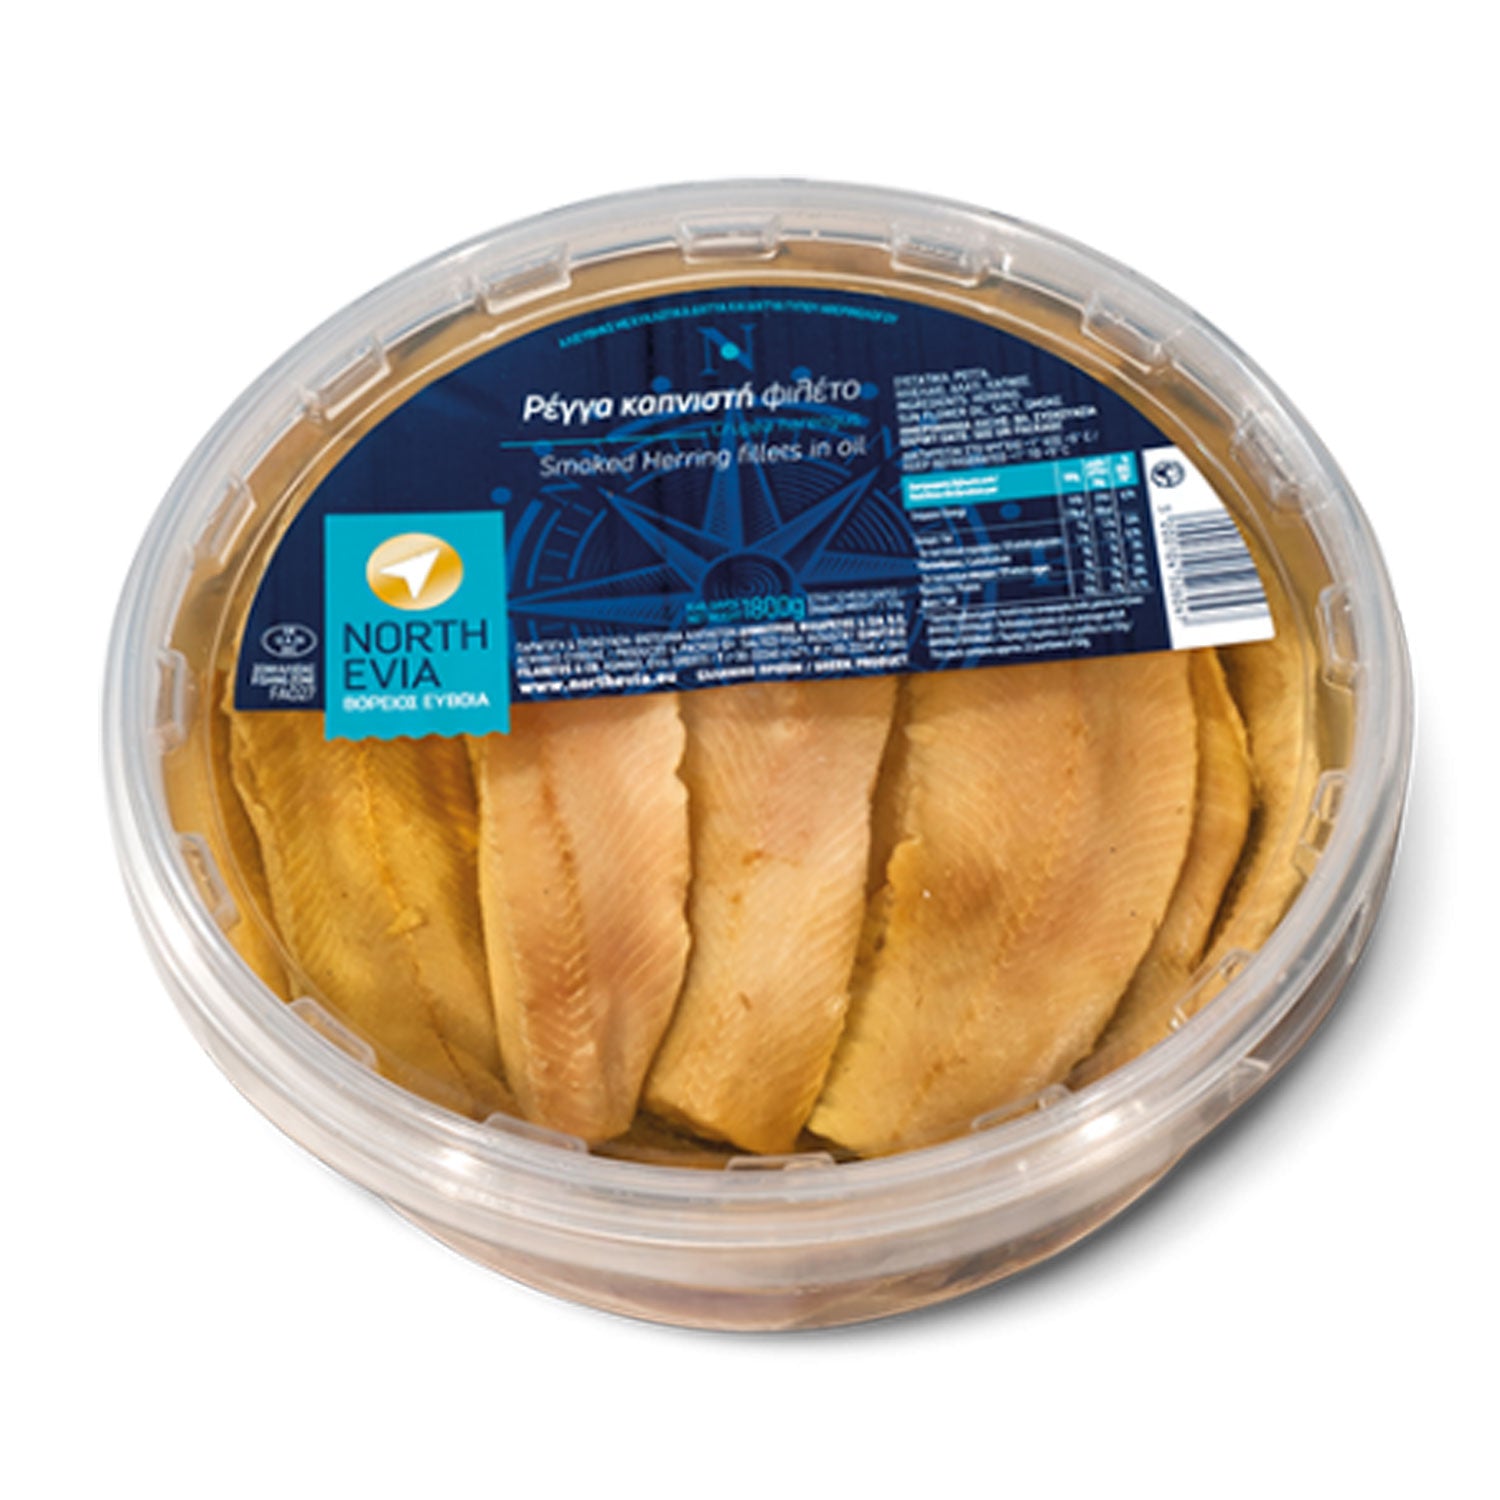 Smoked Herring Fillets from Evia - 2kg